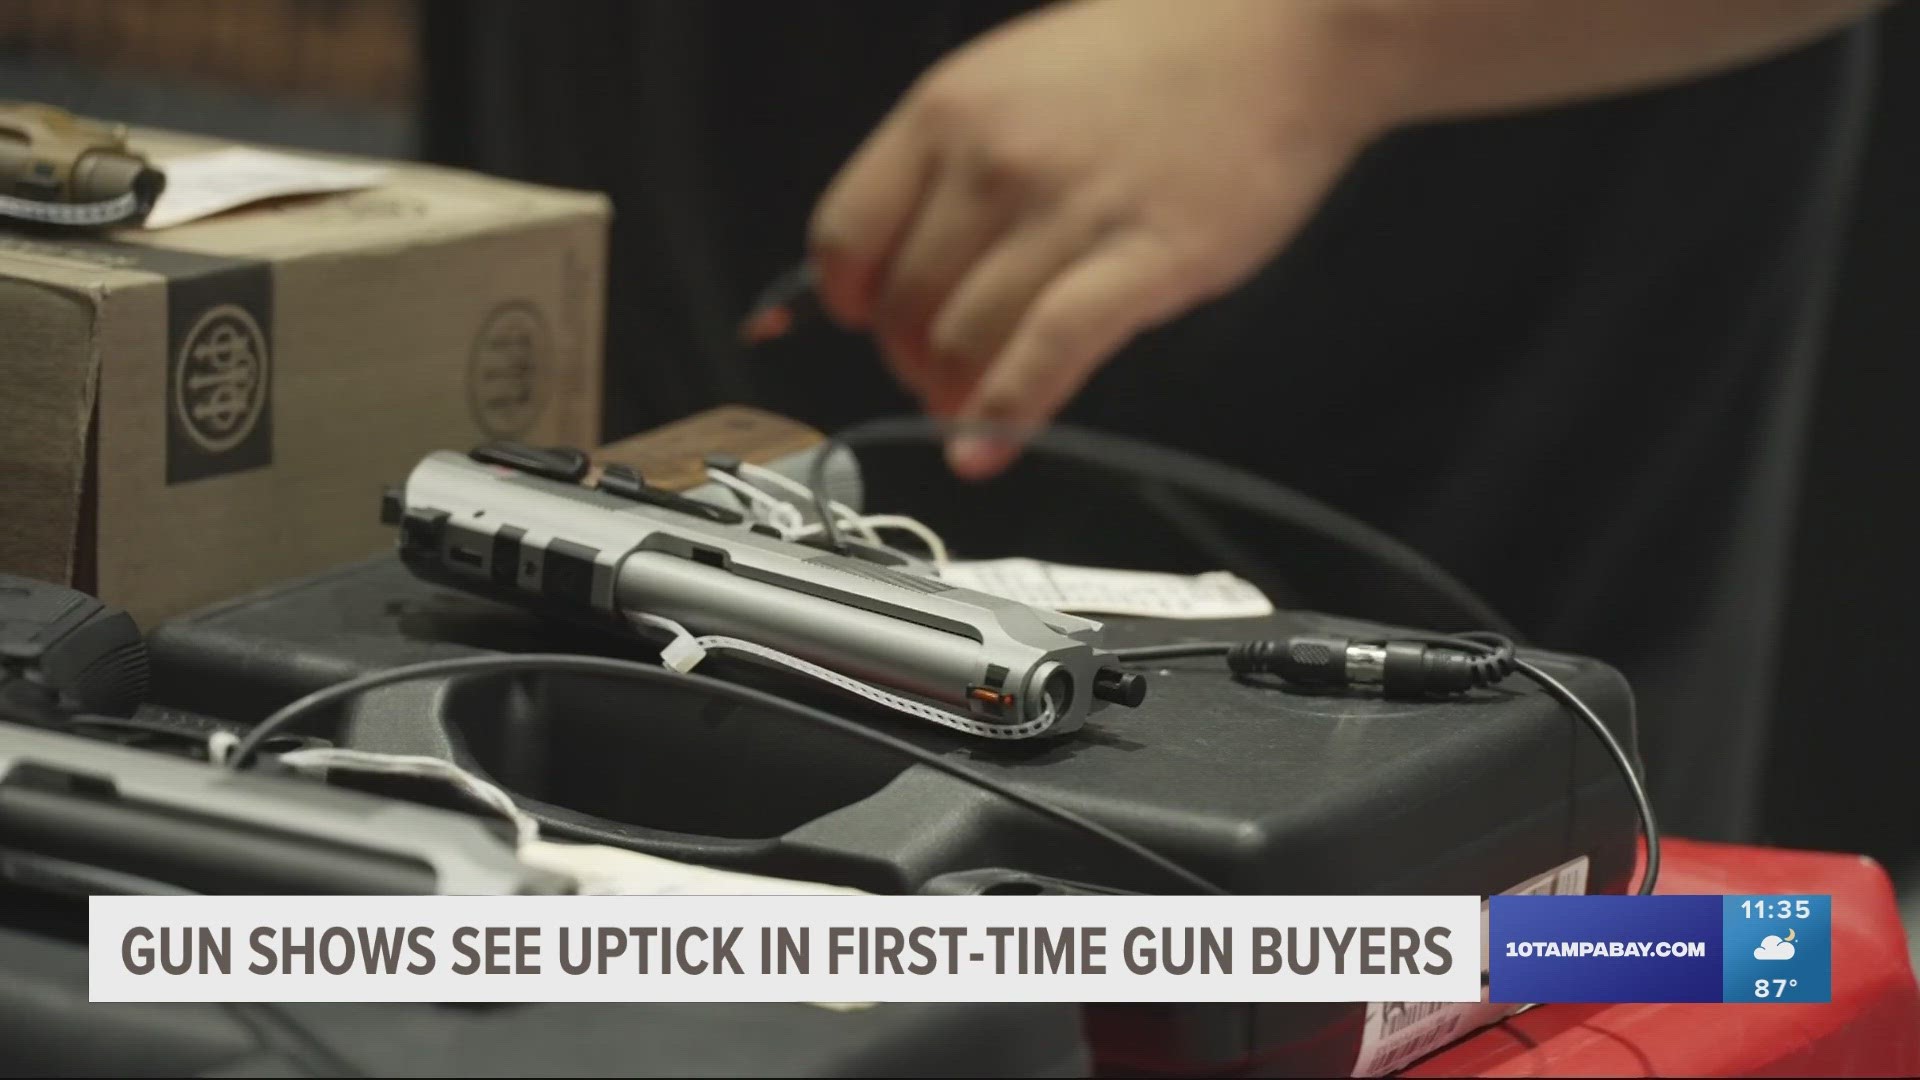 Nearly two months ago, a new law went into effect allowing Floridians to carry a concealed firearm without a permit.  Dealers still encourage CWL classes.